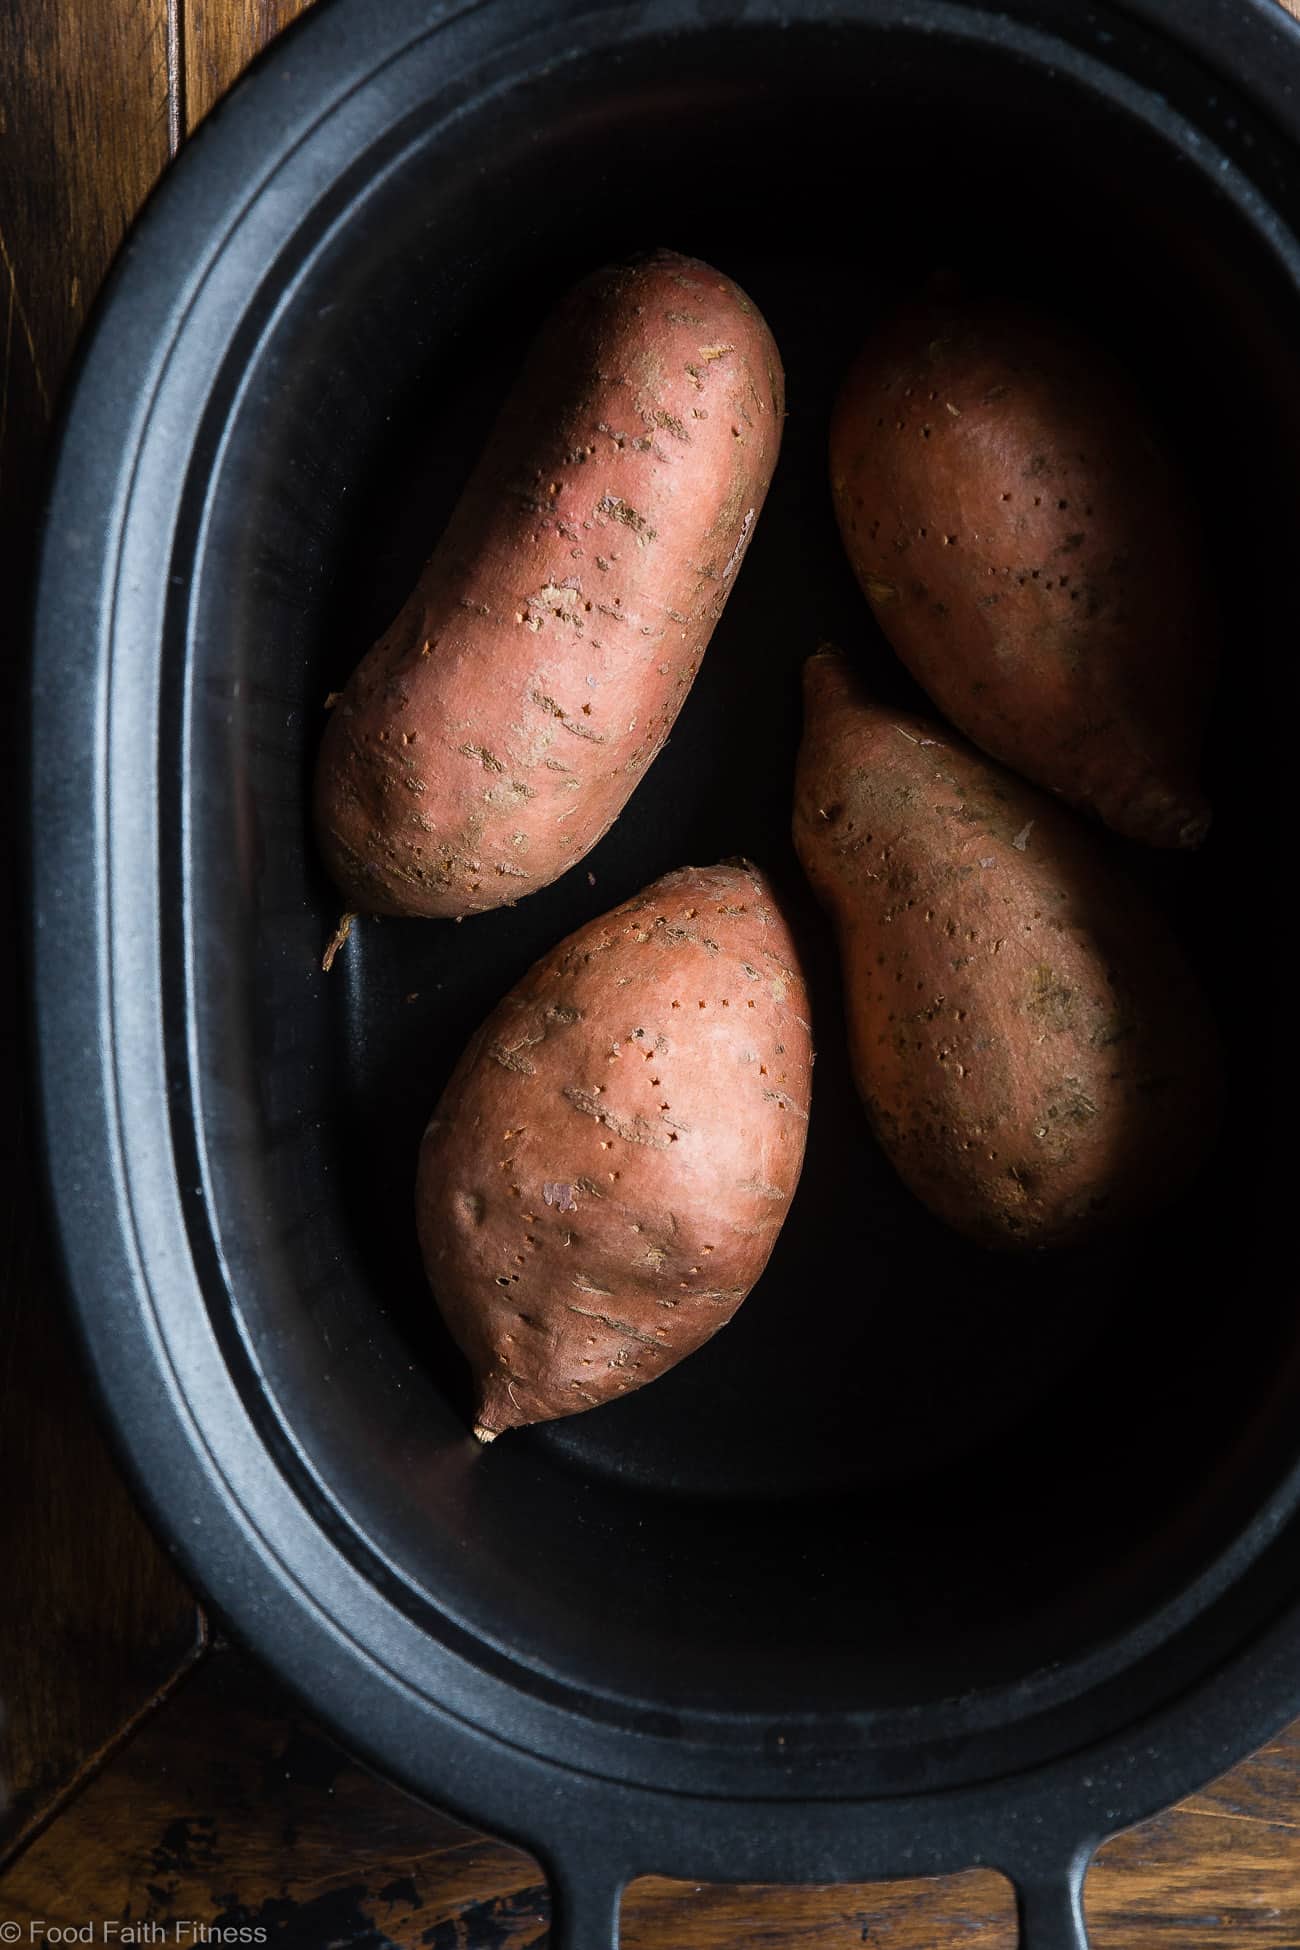 How to Cook Crock Pot Sweet Potatoes - Let the slow cooker do all the work for you! These sweet potatoes are SO easy and come out perfect EVERY TIME! A healthy, paleo, vegan and whole30 side dish! | #Foodfaithfitness | #Paleo #Glutenfree #Healthy #Slowcooker #Crockpot